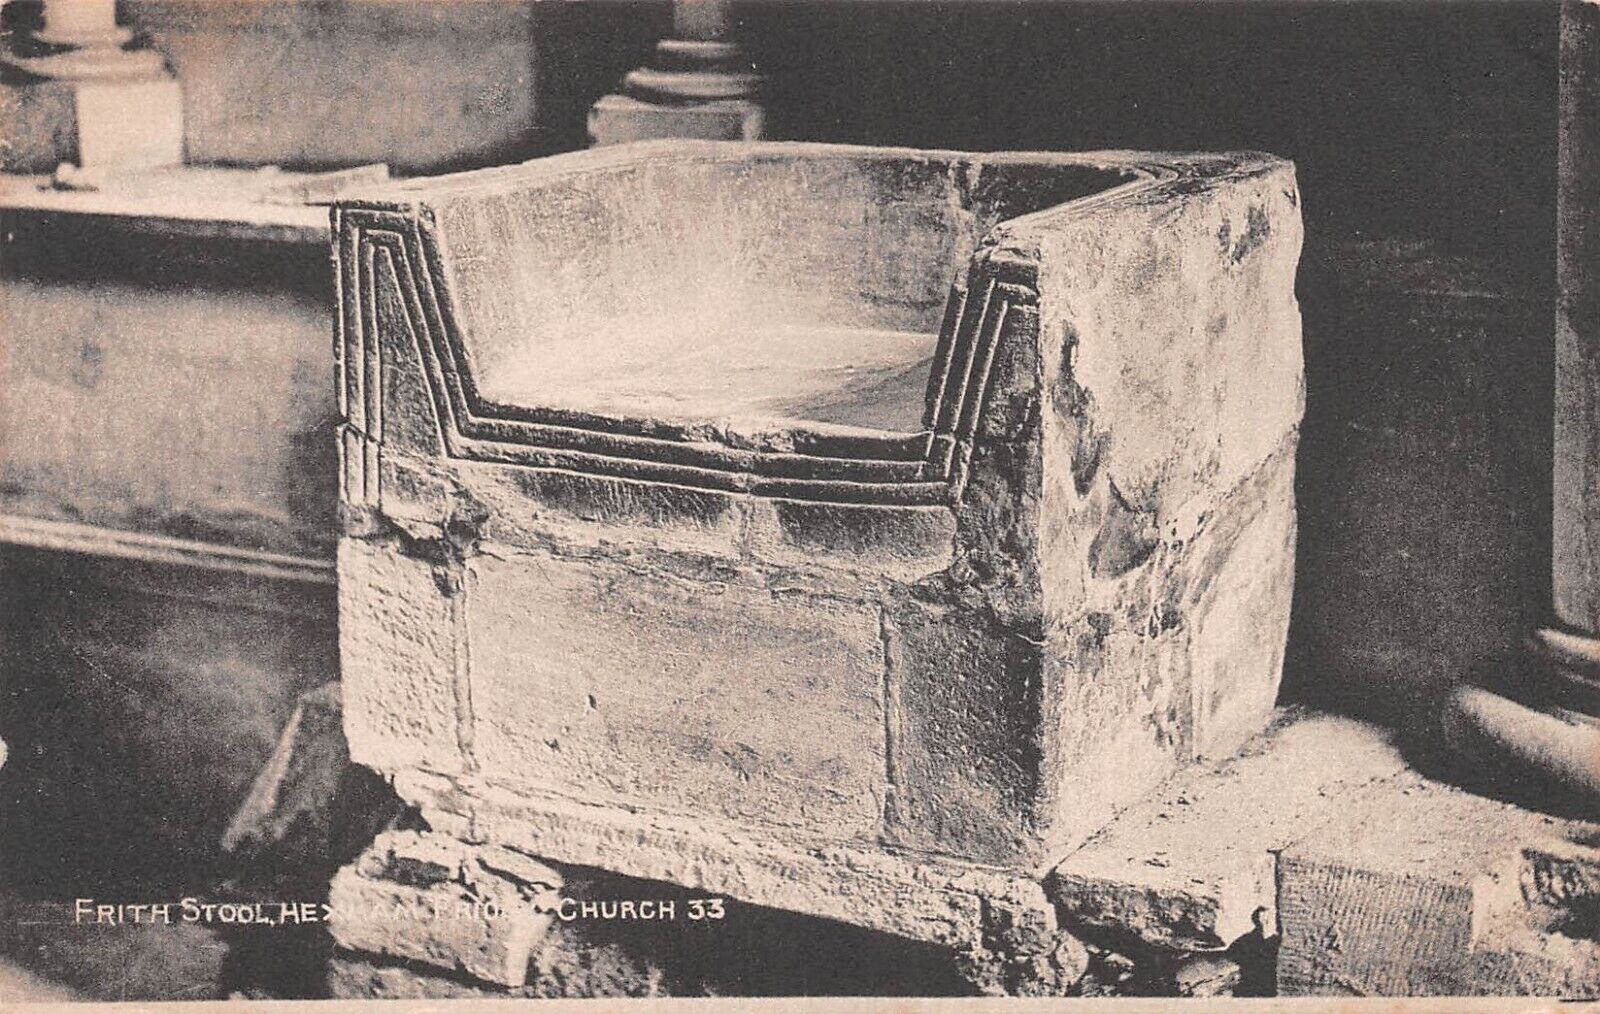 HEXHAM - FRITH STOOL - PRIORY CHURCH ~ AN OLD POSTCARD #2231287